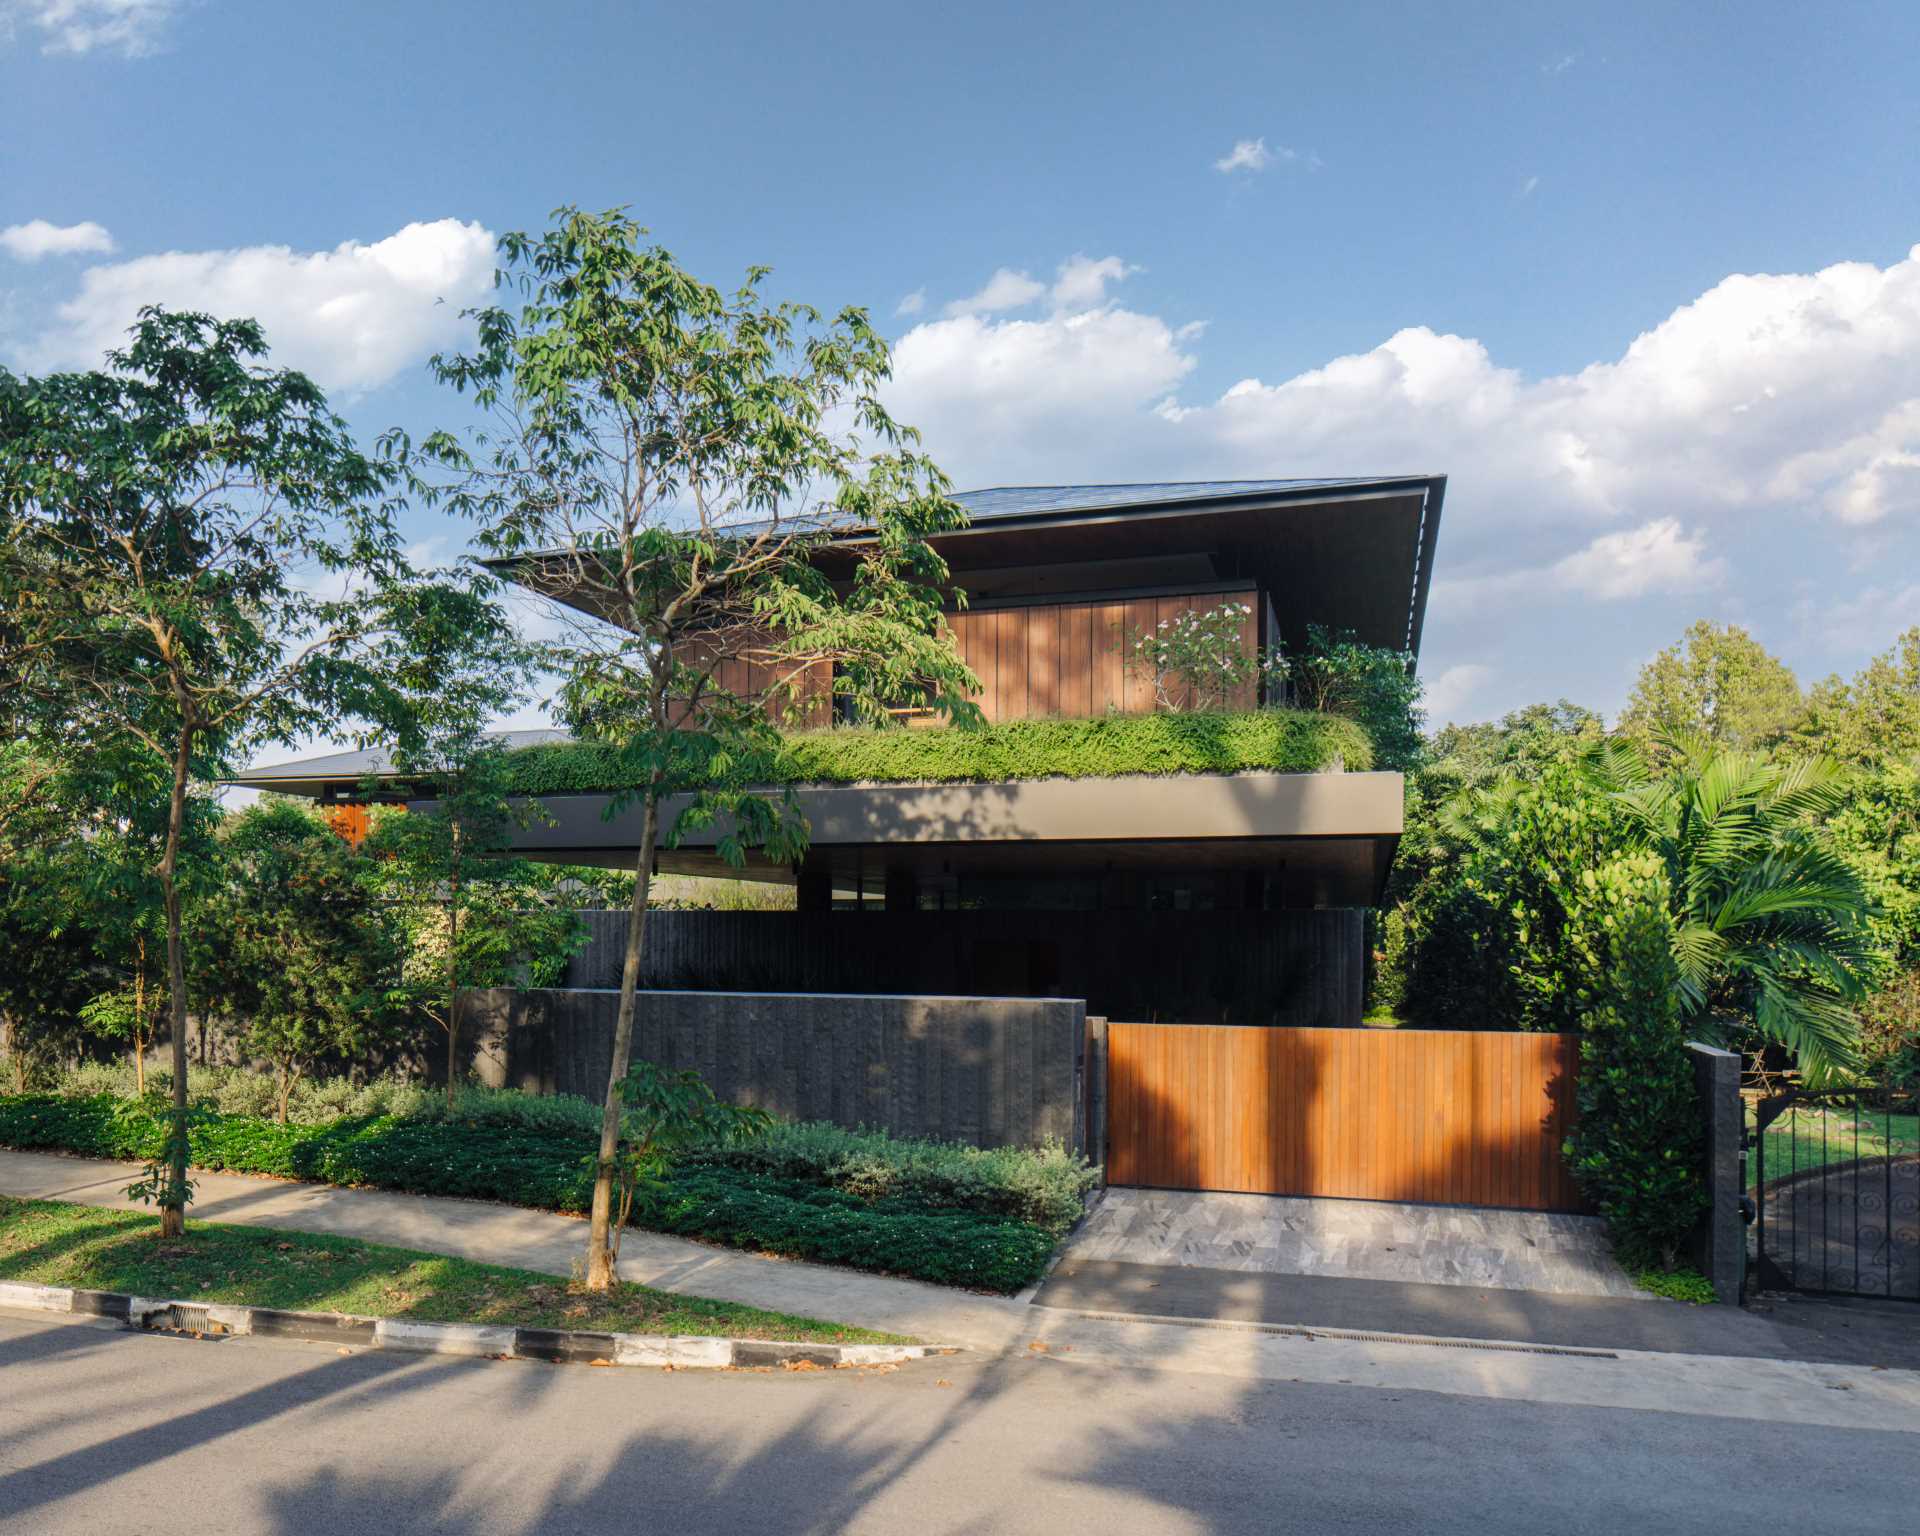 A long stone wall lined with vertical plantings and tall trees conceals a large part of this modern house, offering privacy and a welcome disconnect from the city surroundings.